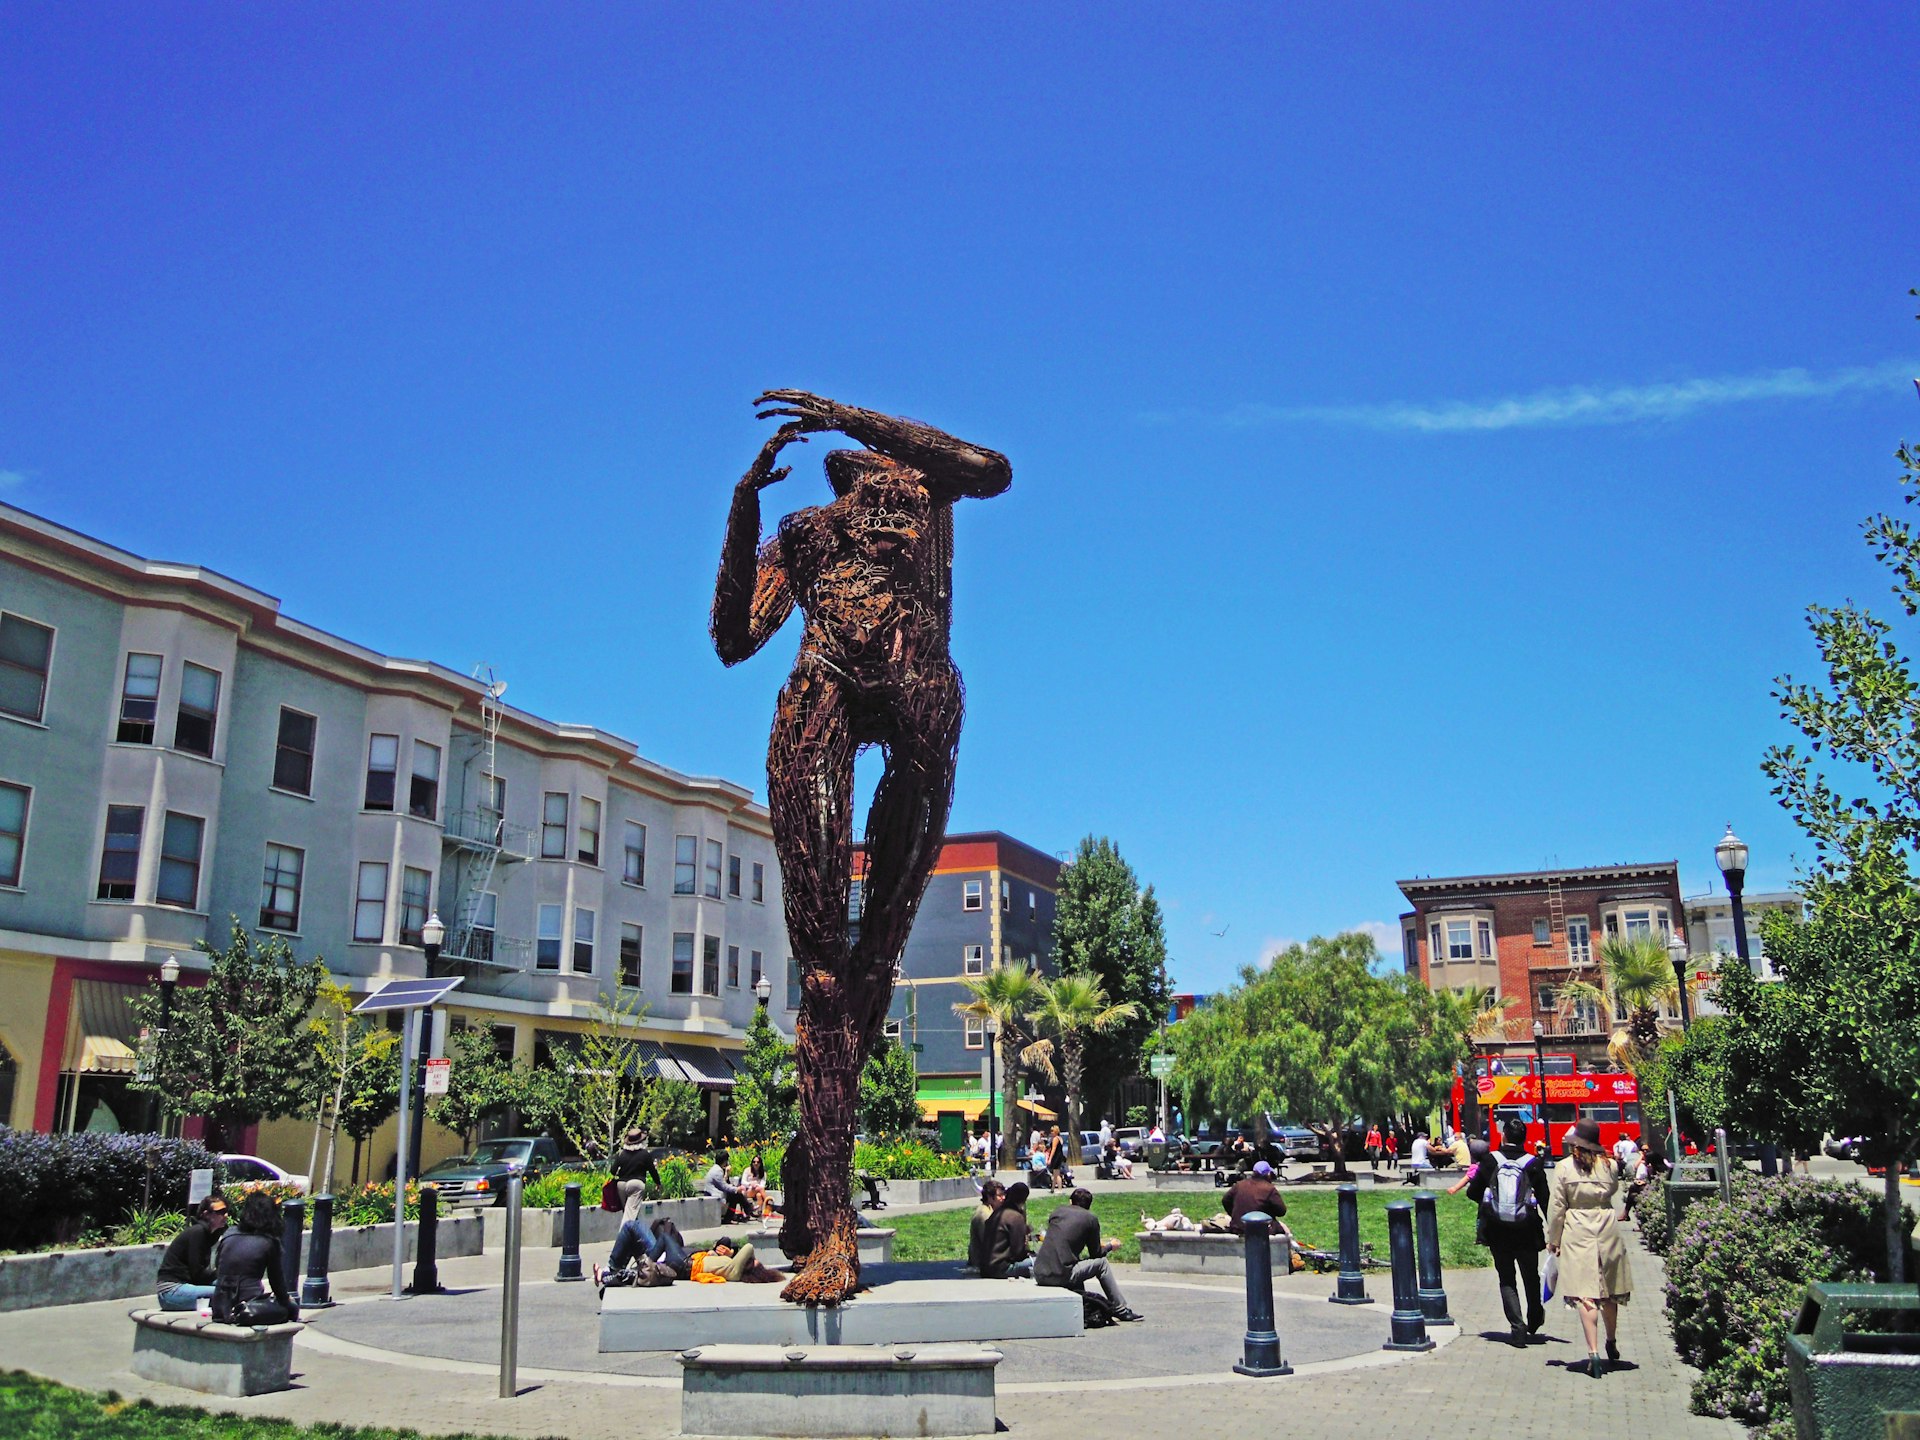 The sculpture Ecstasy by Dan Das Mann and Karen Cusolito, made from salvaged and recycled steel, stands in Patricia's Green, San Francisco. 